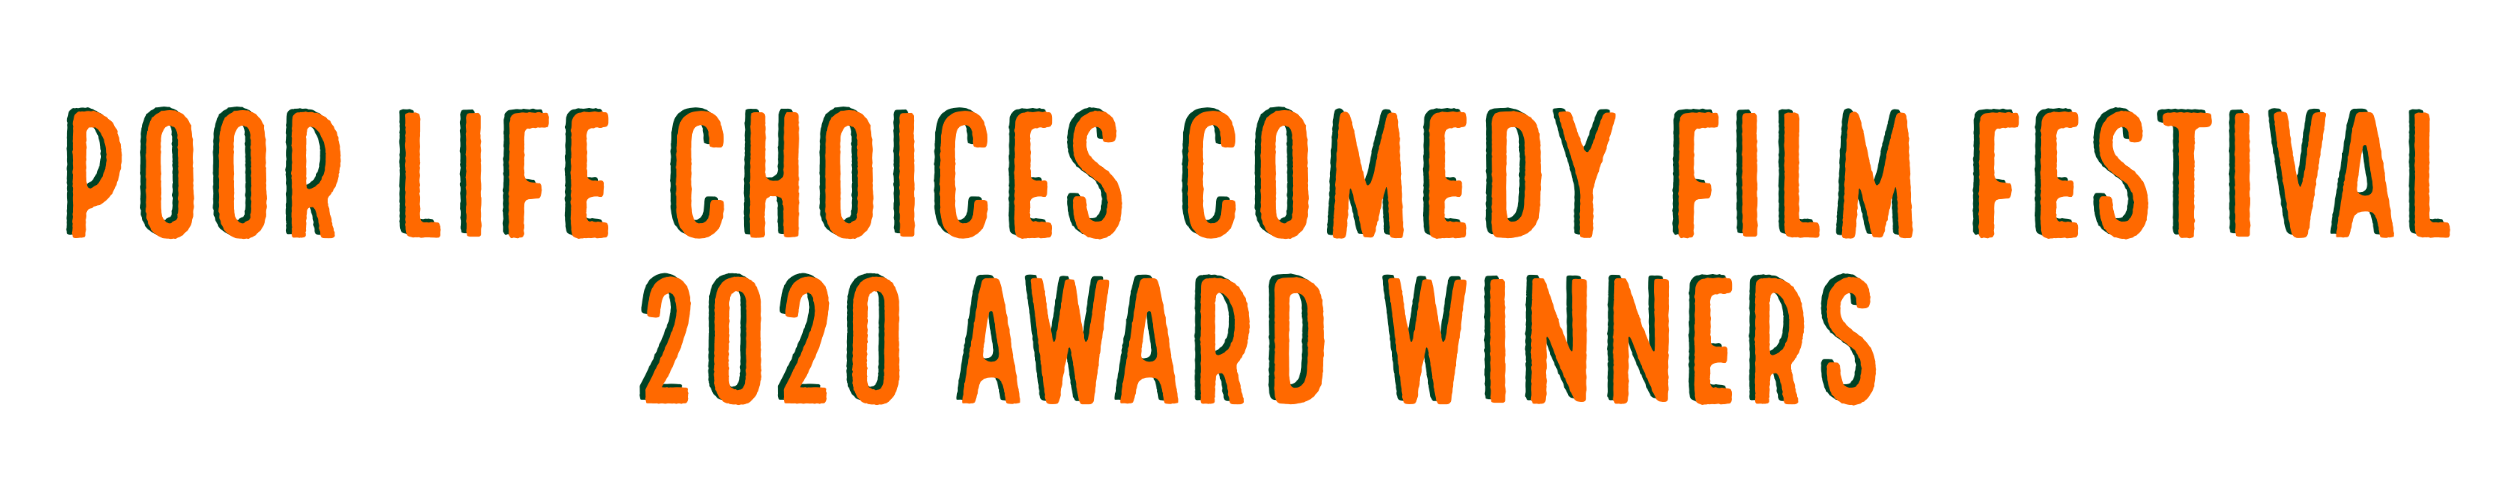 POOR LIFE CHOICES COMEDY FILM FESTIVAL 2020 AWARD WINNERS